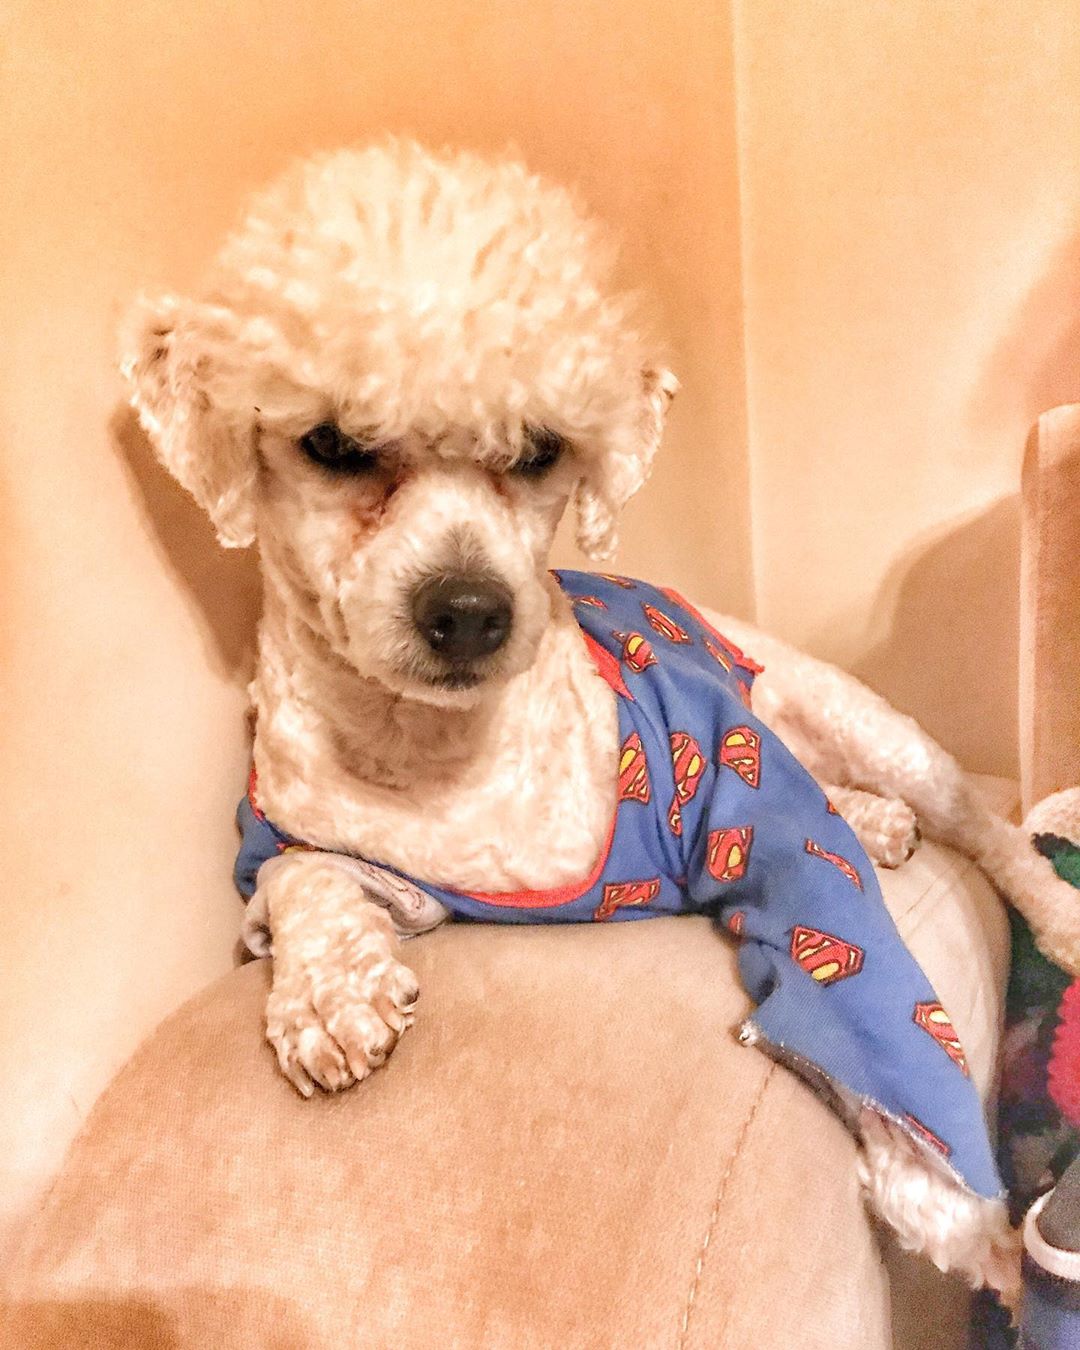 Bichon Frise lying on top of its bed wearing a superman long sleeve top with its grumpy face